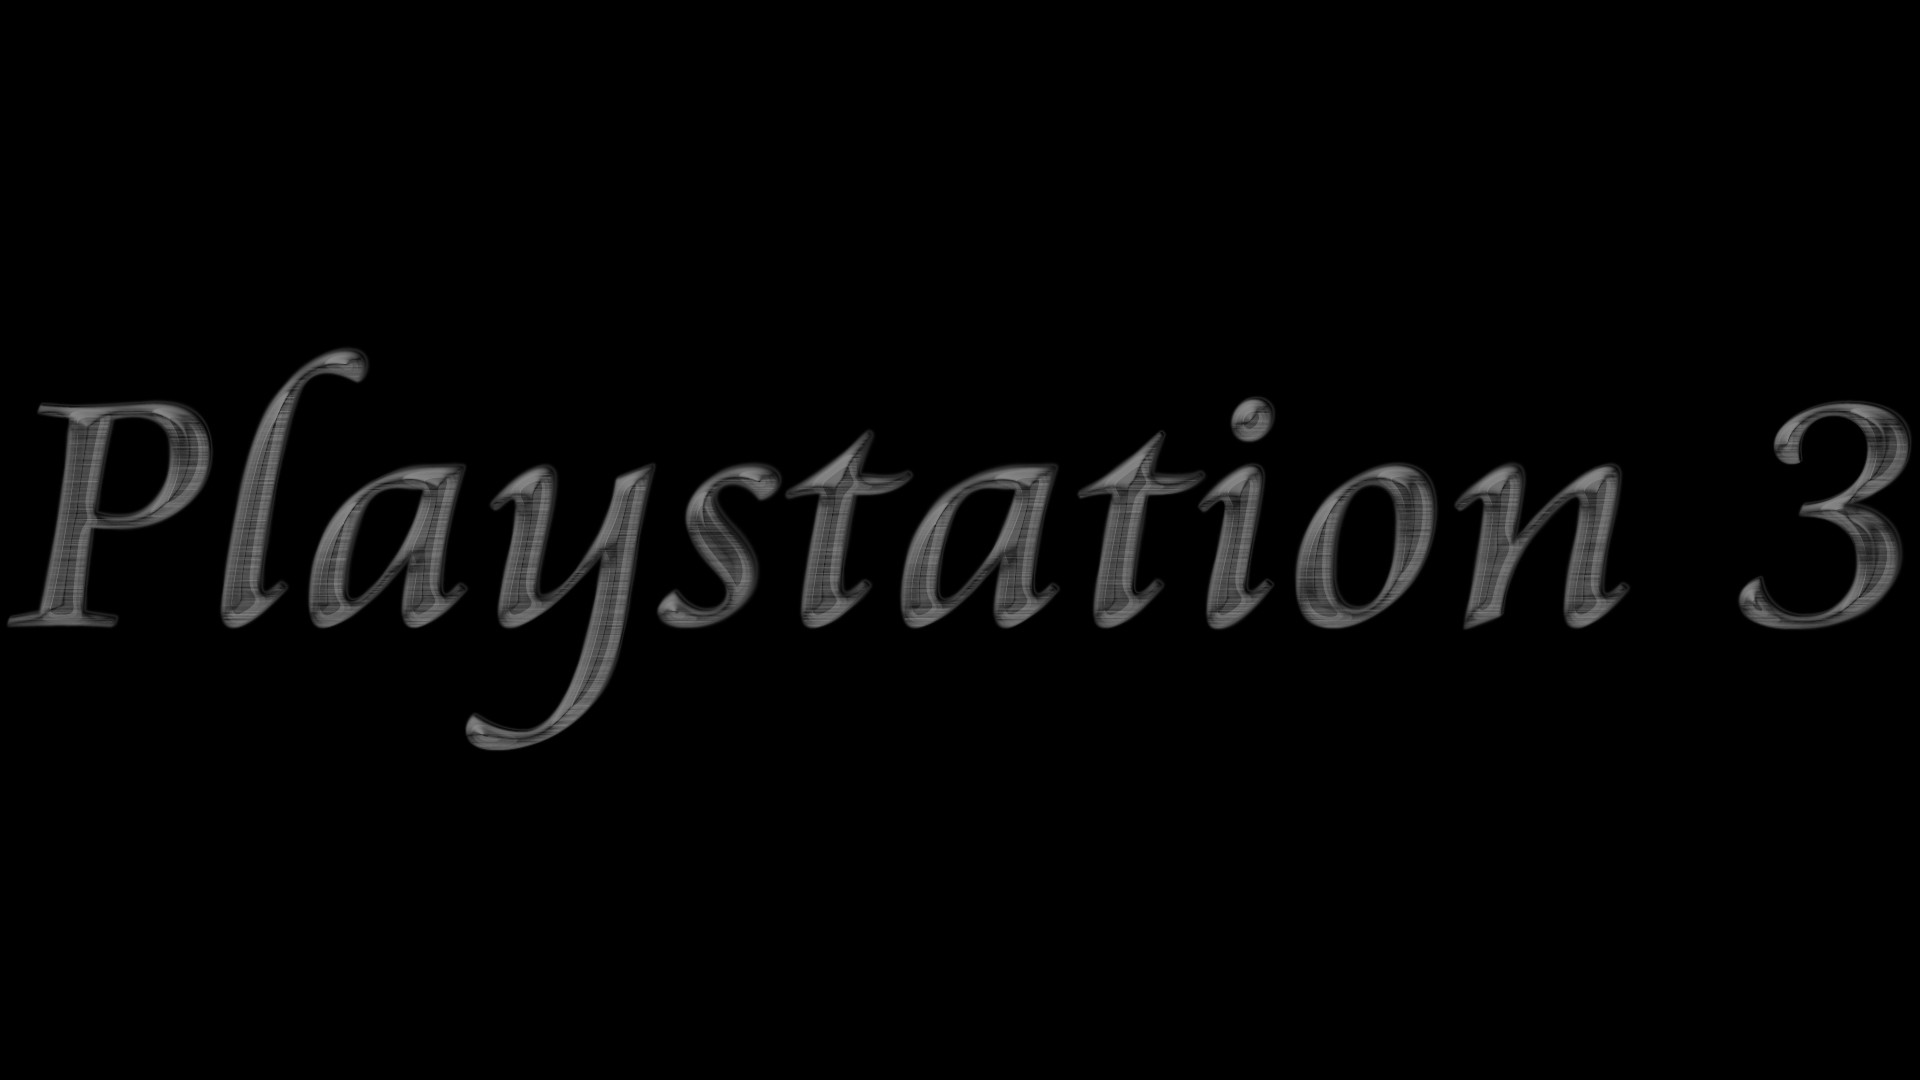 Ps3 Logo Wallpapers Photo 1920x1080